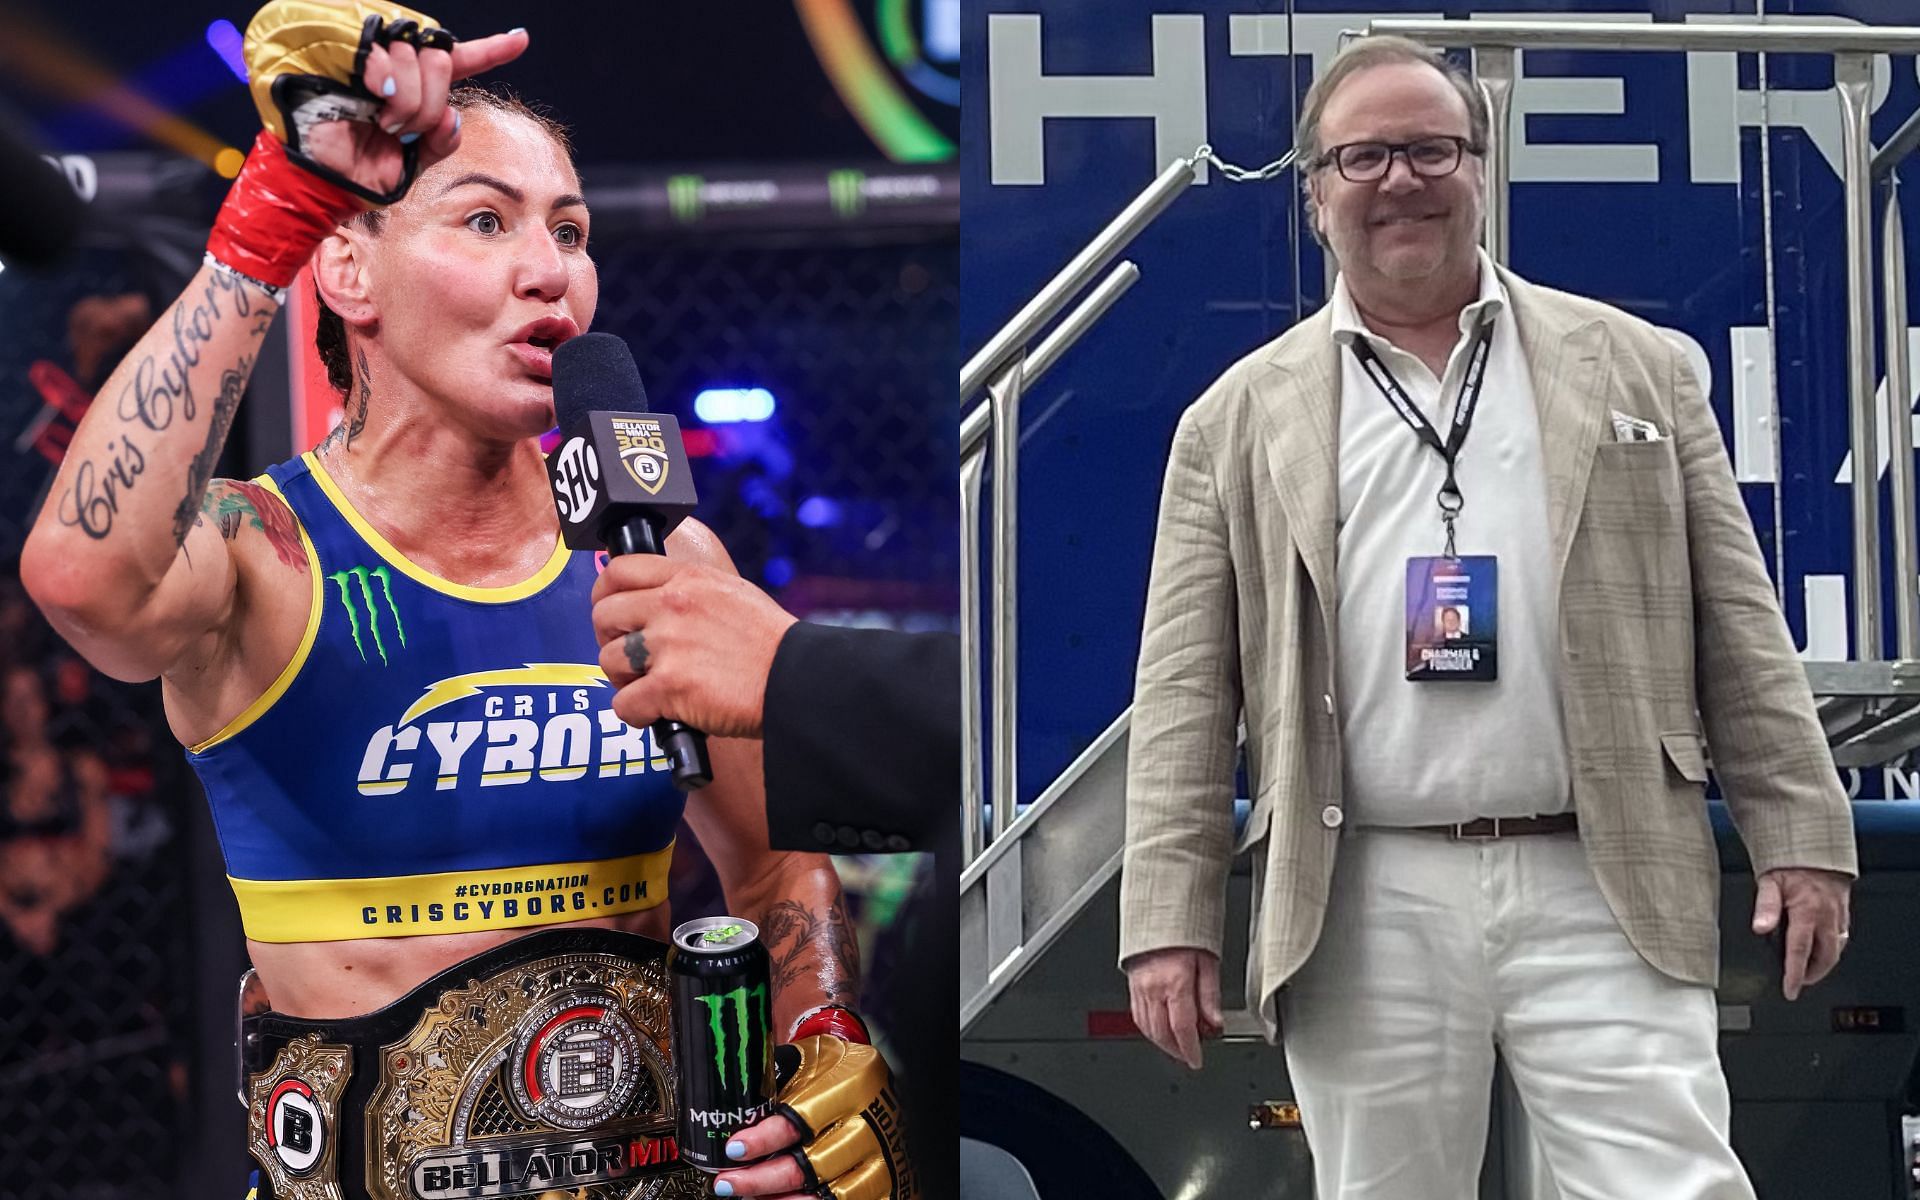 Cris Cyborg blasts Donn Davis for making her only champion yet to be booked since PFL-Bellator merger [Image courtesy: Lucas Noonan/Bellator MMA, and @DonnDavisPFL- X]